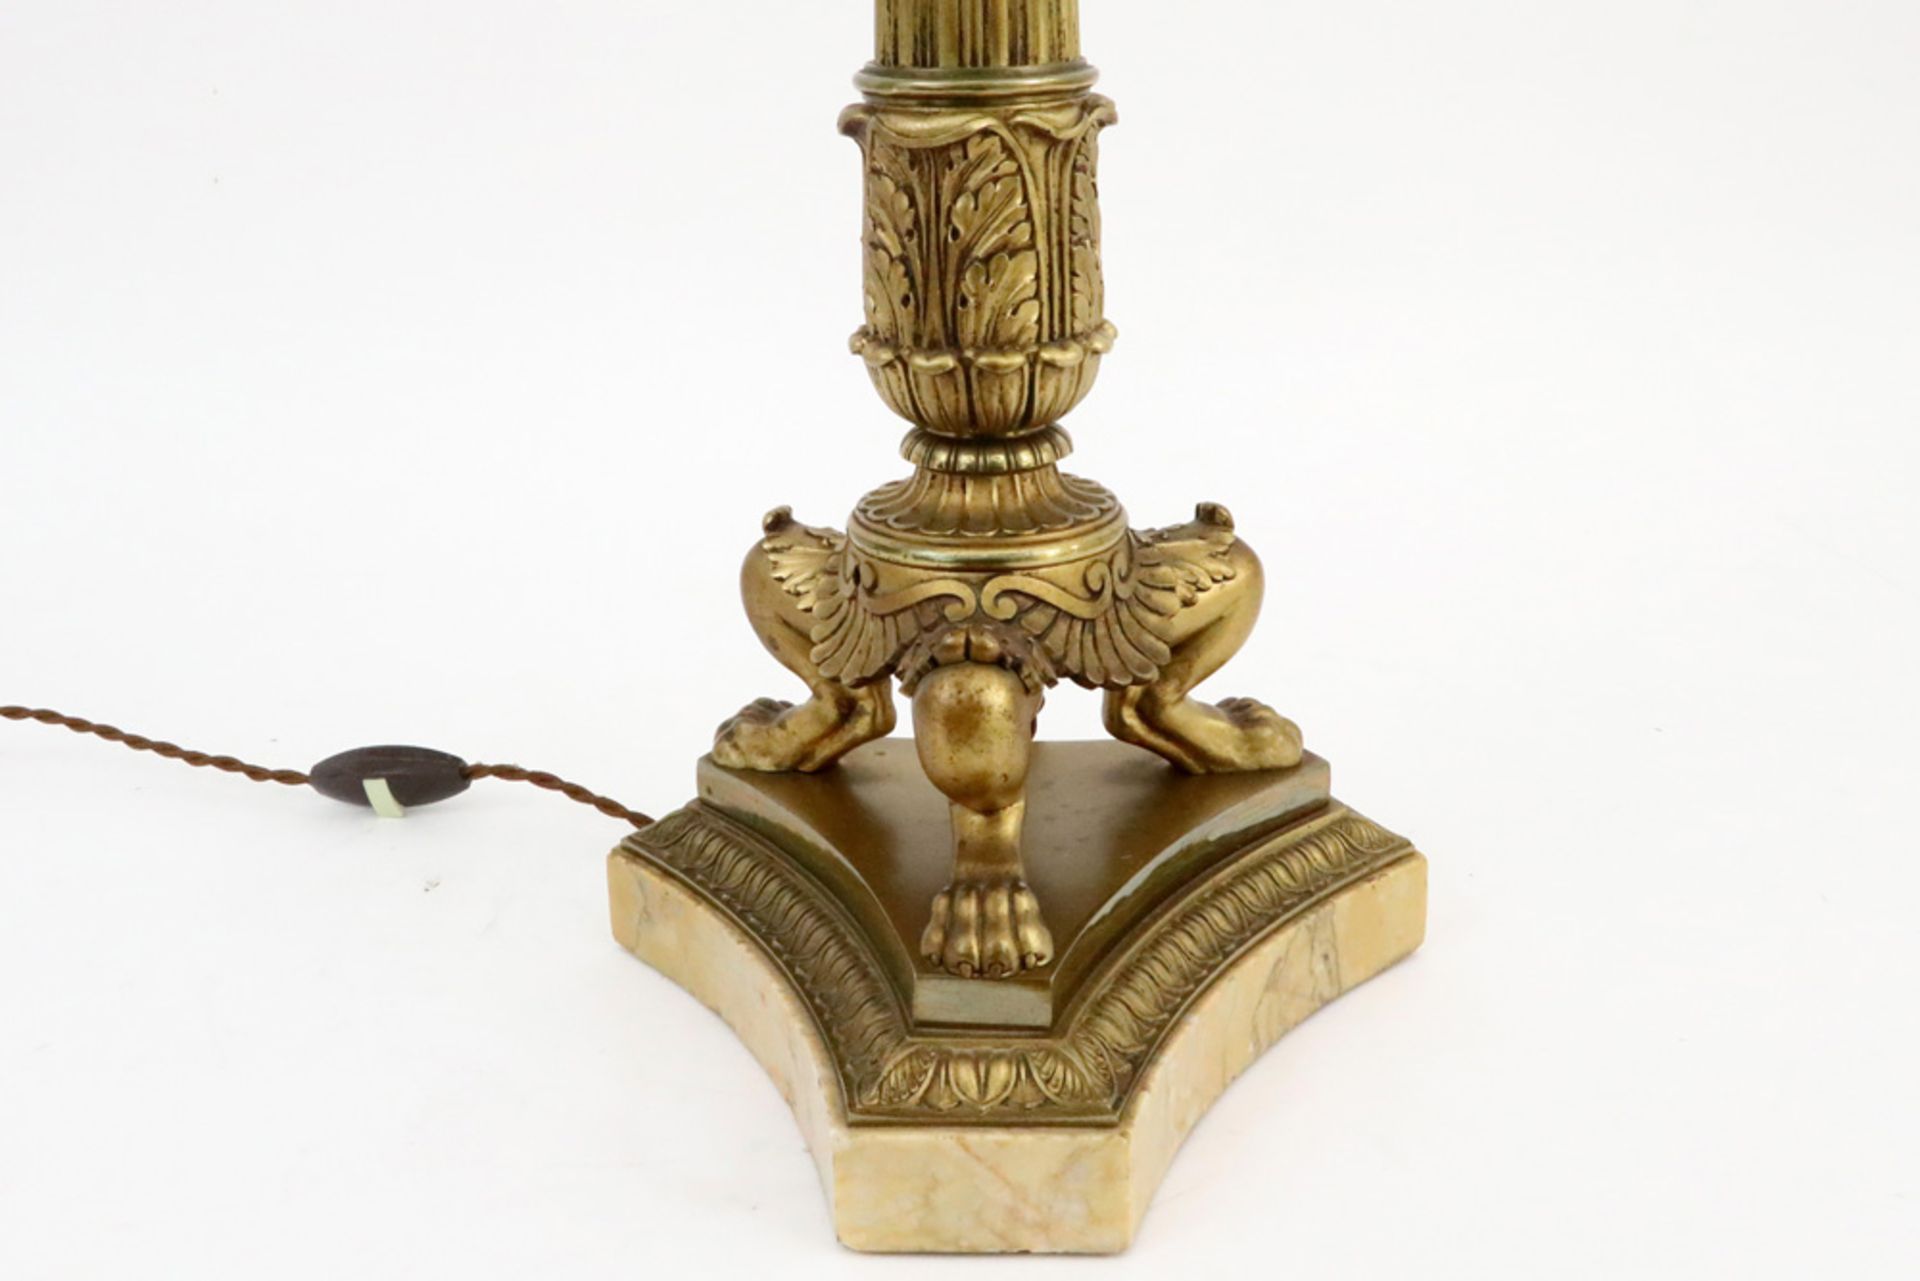 lamp with an 'antique' Empire style candelabra in gilded bronze on a marble base || Schemerlamp - Image 4 of 4